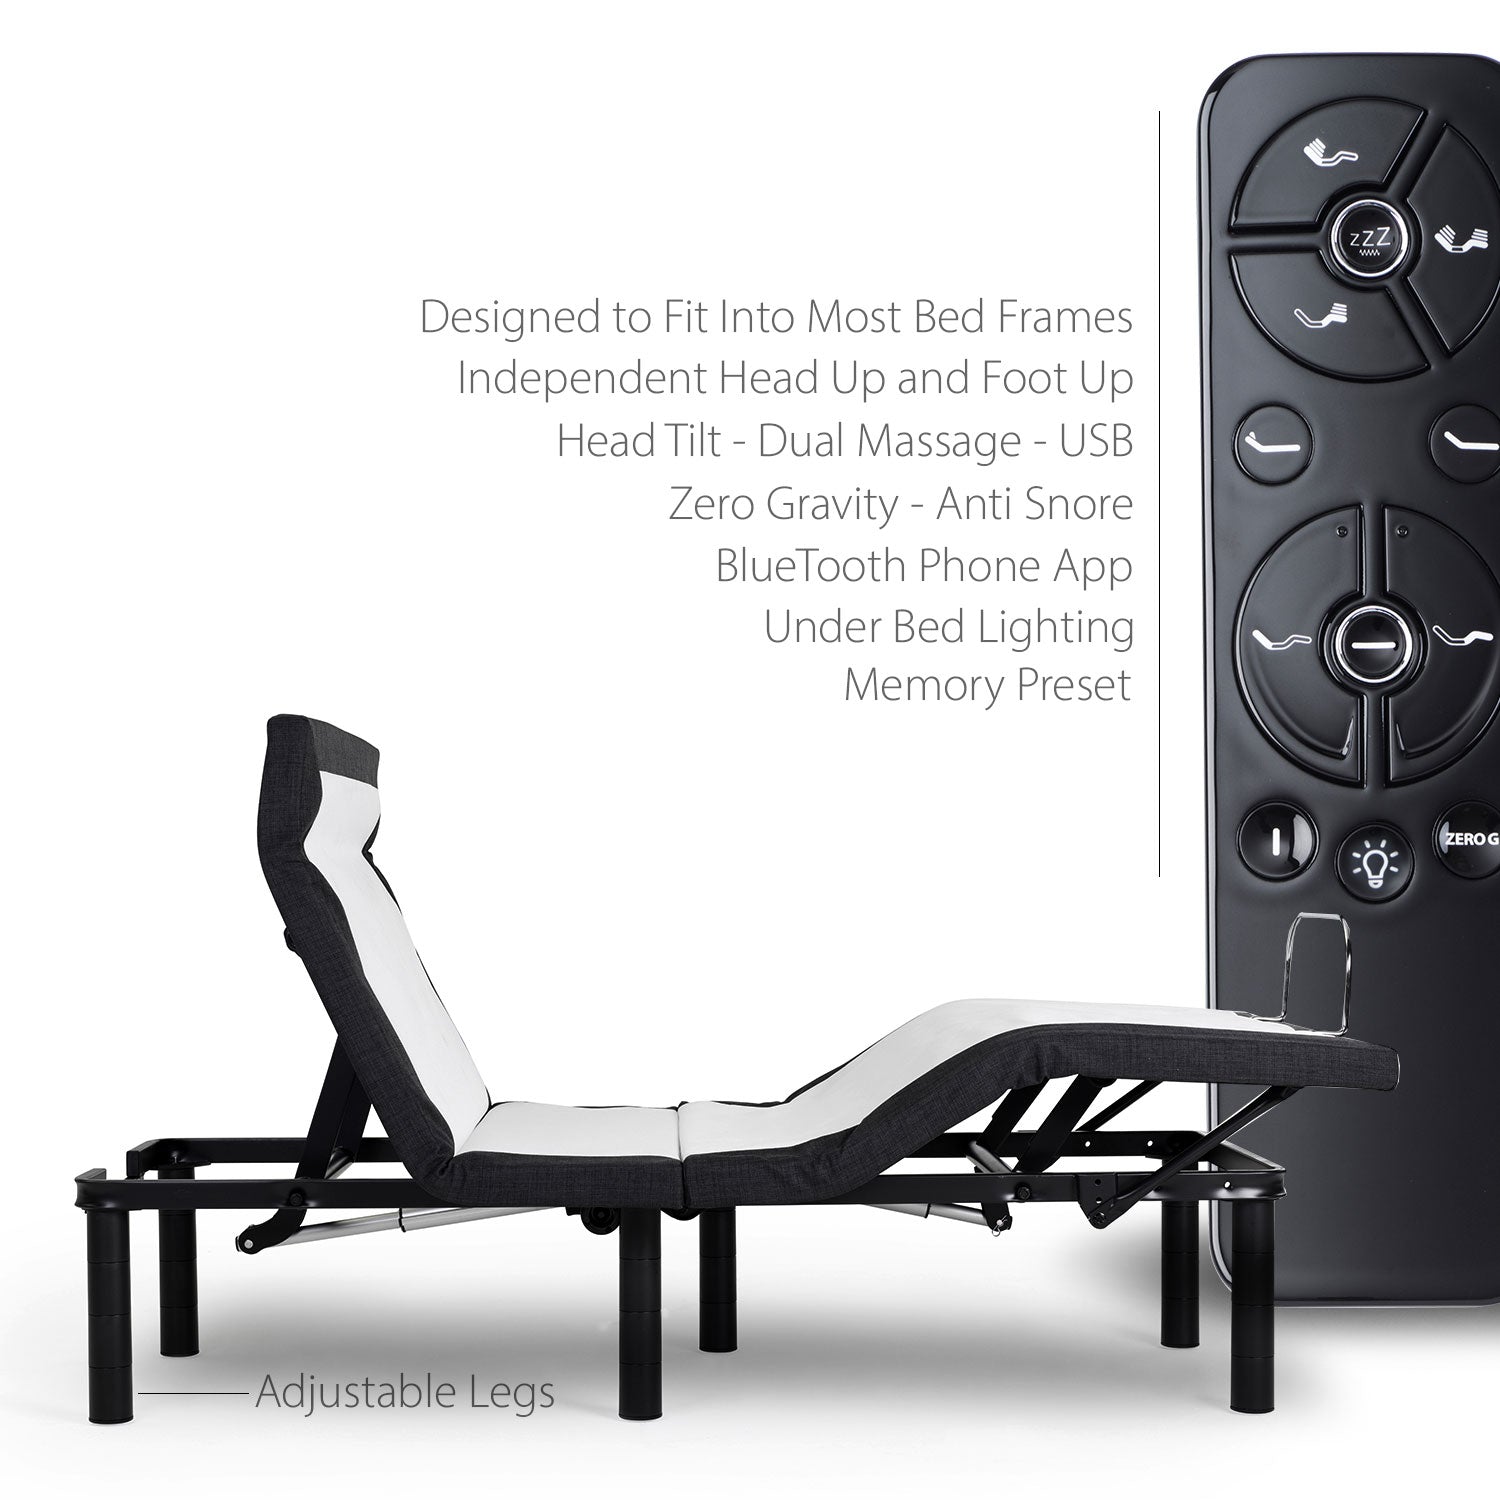 Open Box Return - e5 Head Tilt Adjustable Bed Base with Wireless Remote